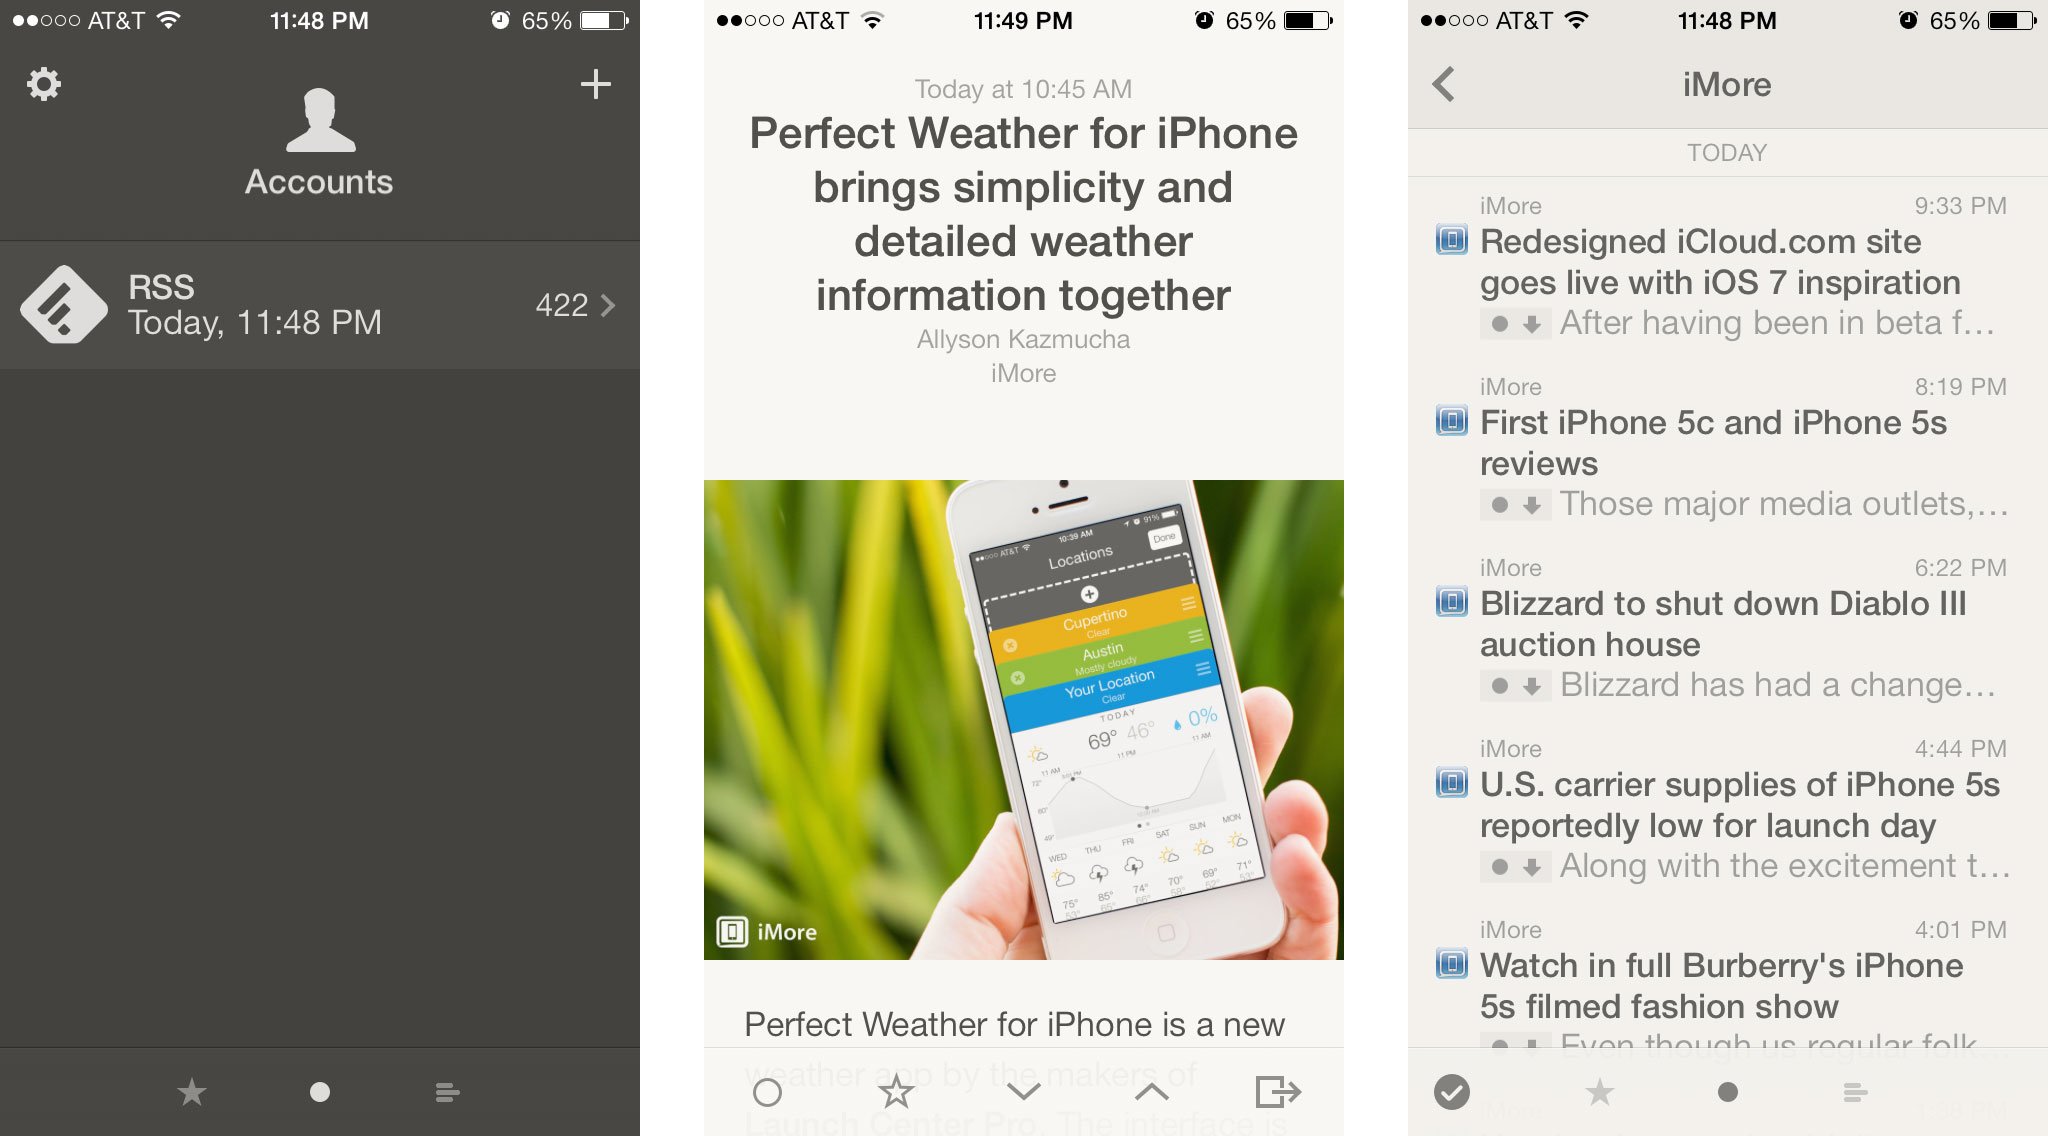 Best news apps for iPhone: Reeder 2